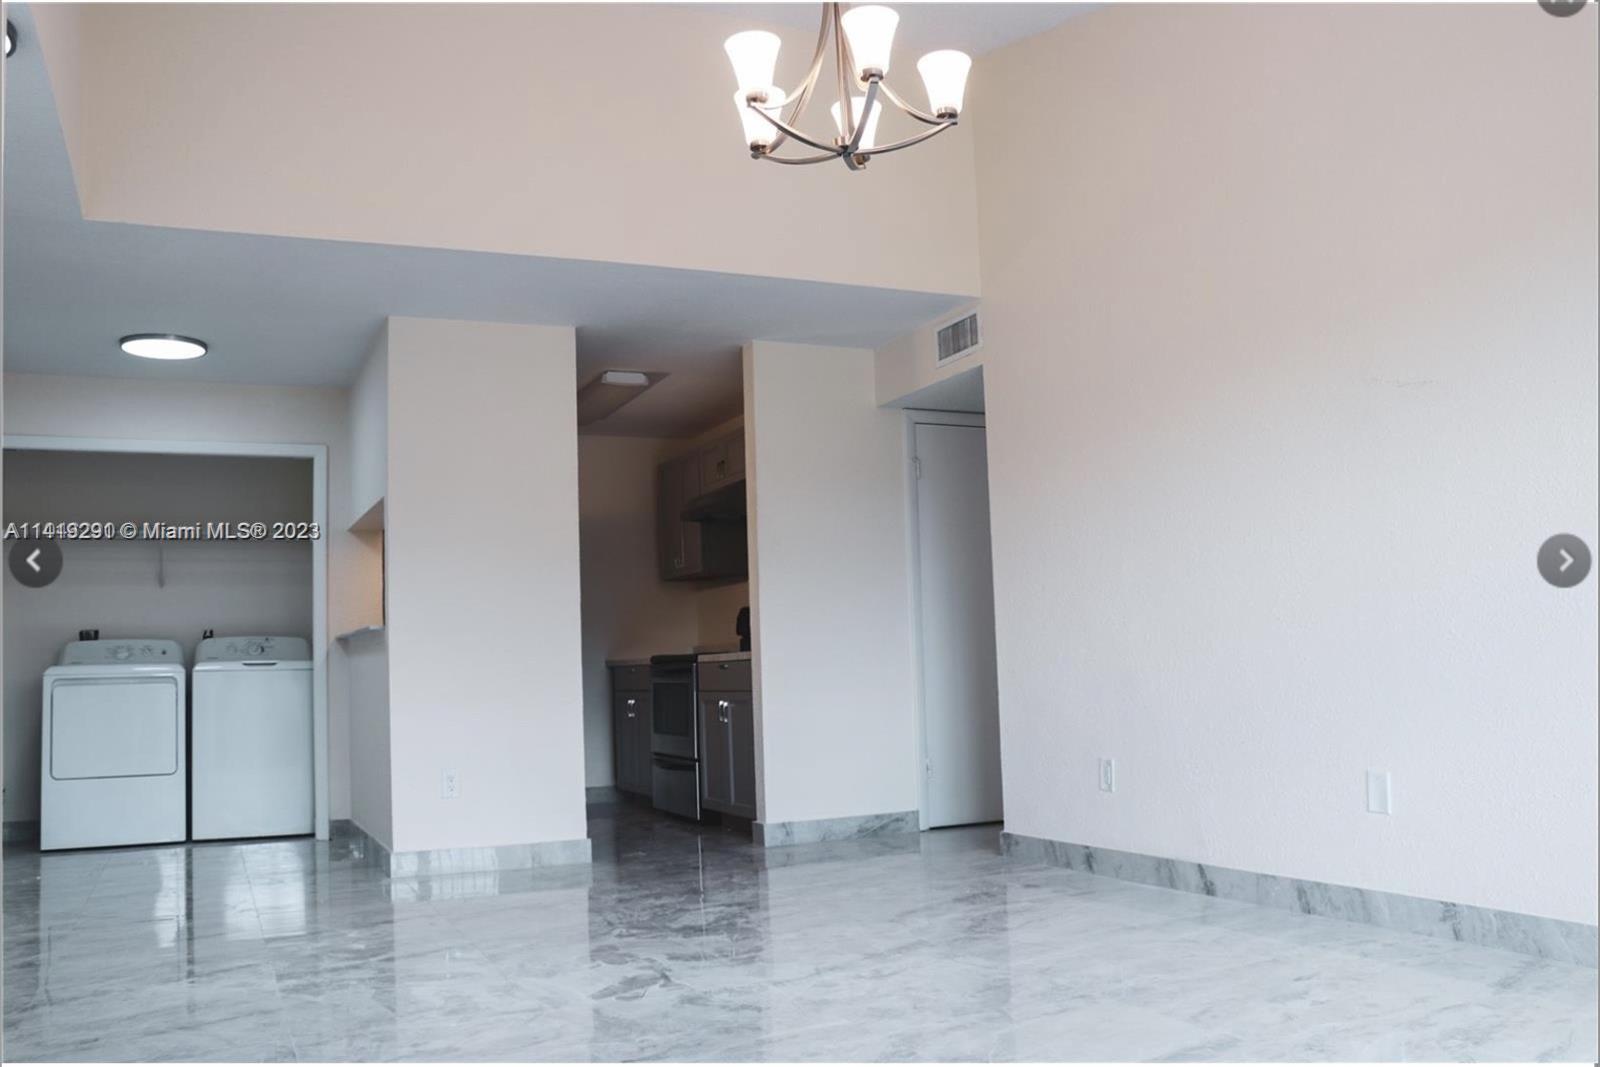 Introducing a stunning apartment in an excellent location in Pompano Beach. This spacious and recent